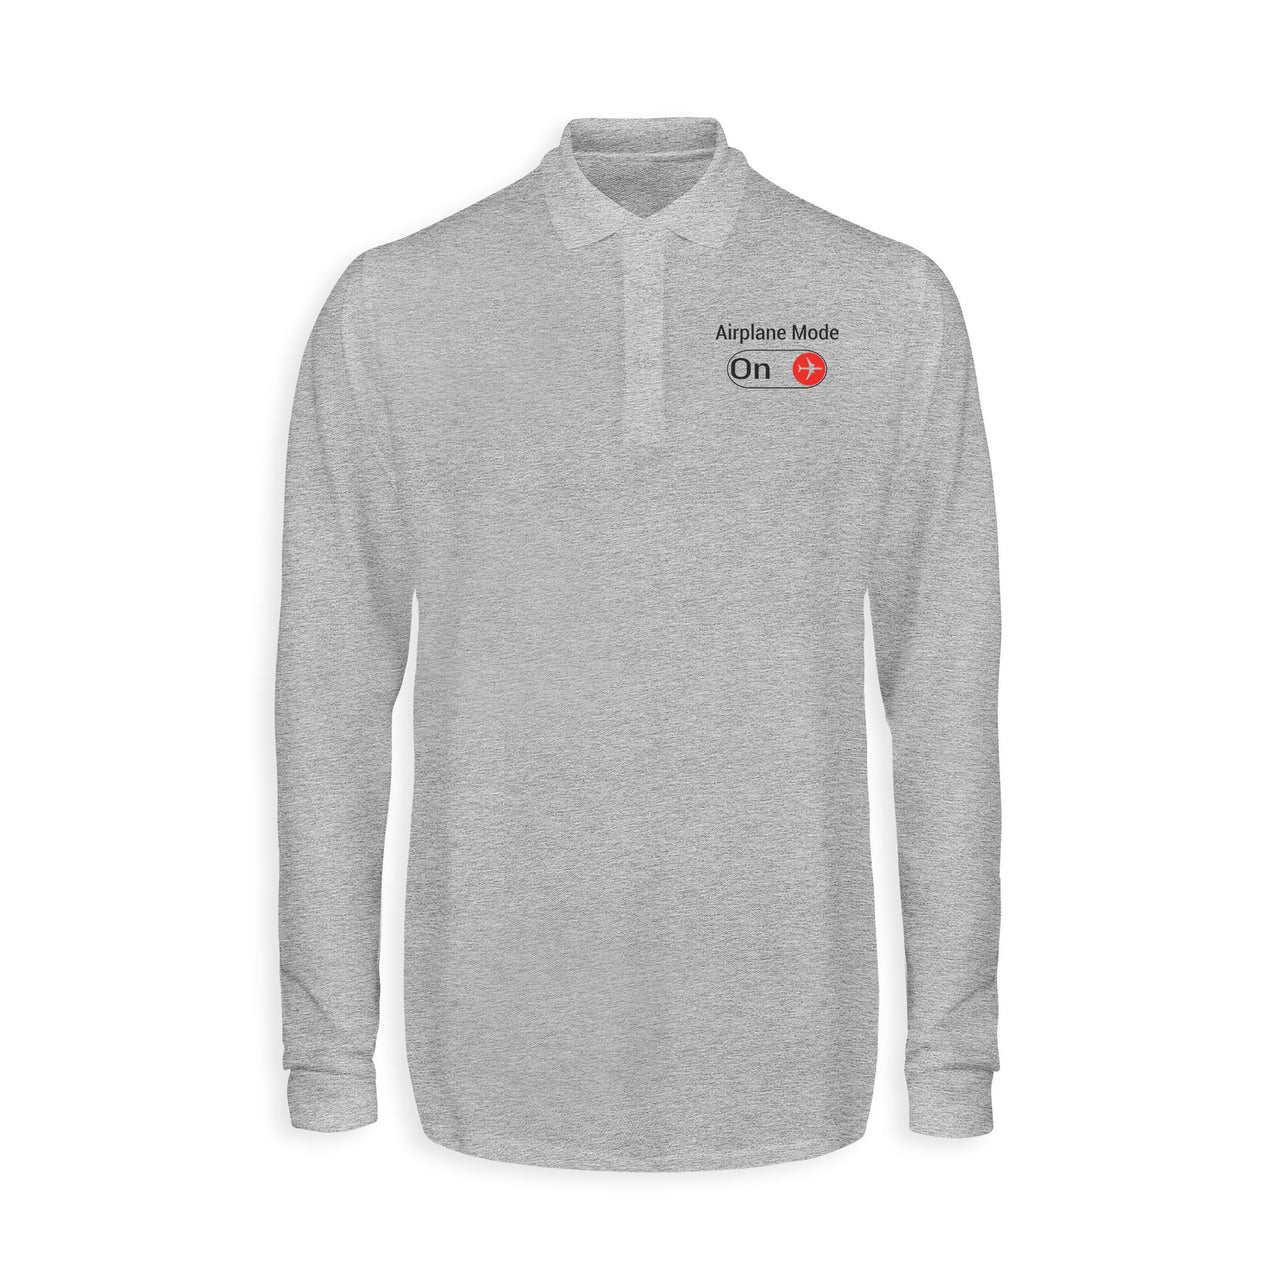 Airplane Mode On Designed Long Sleeve Polo T-Shirts